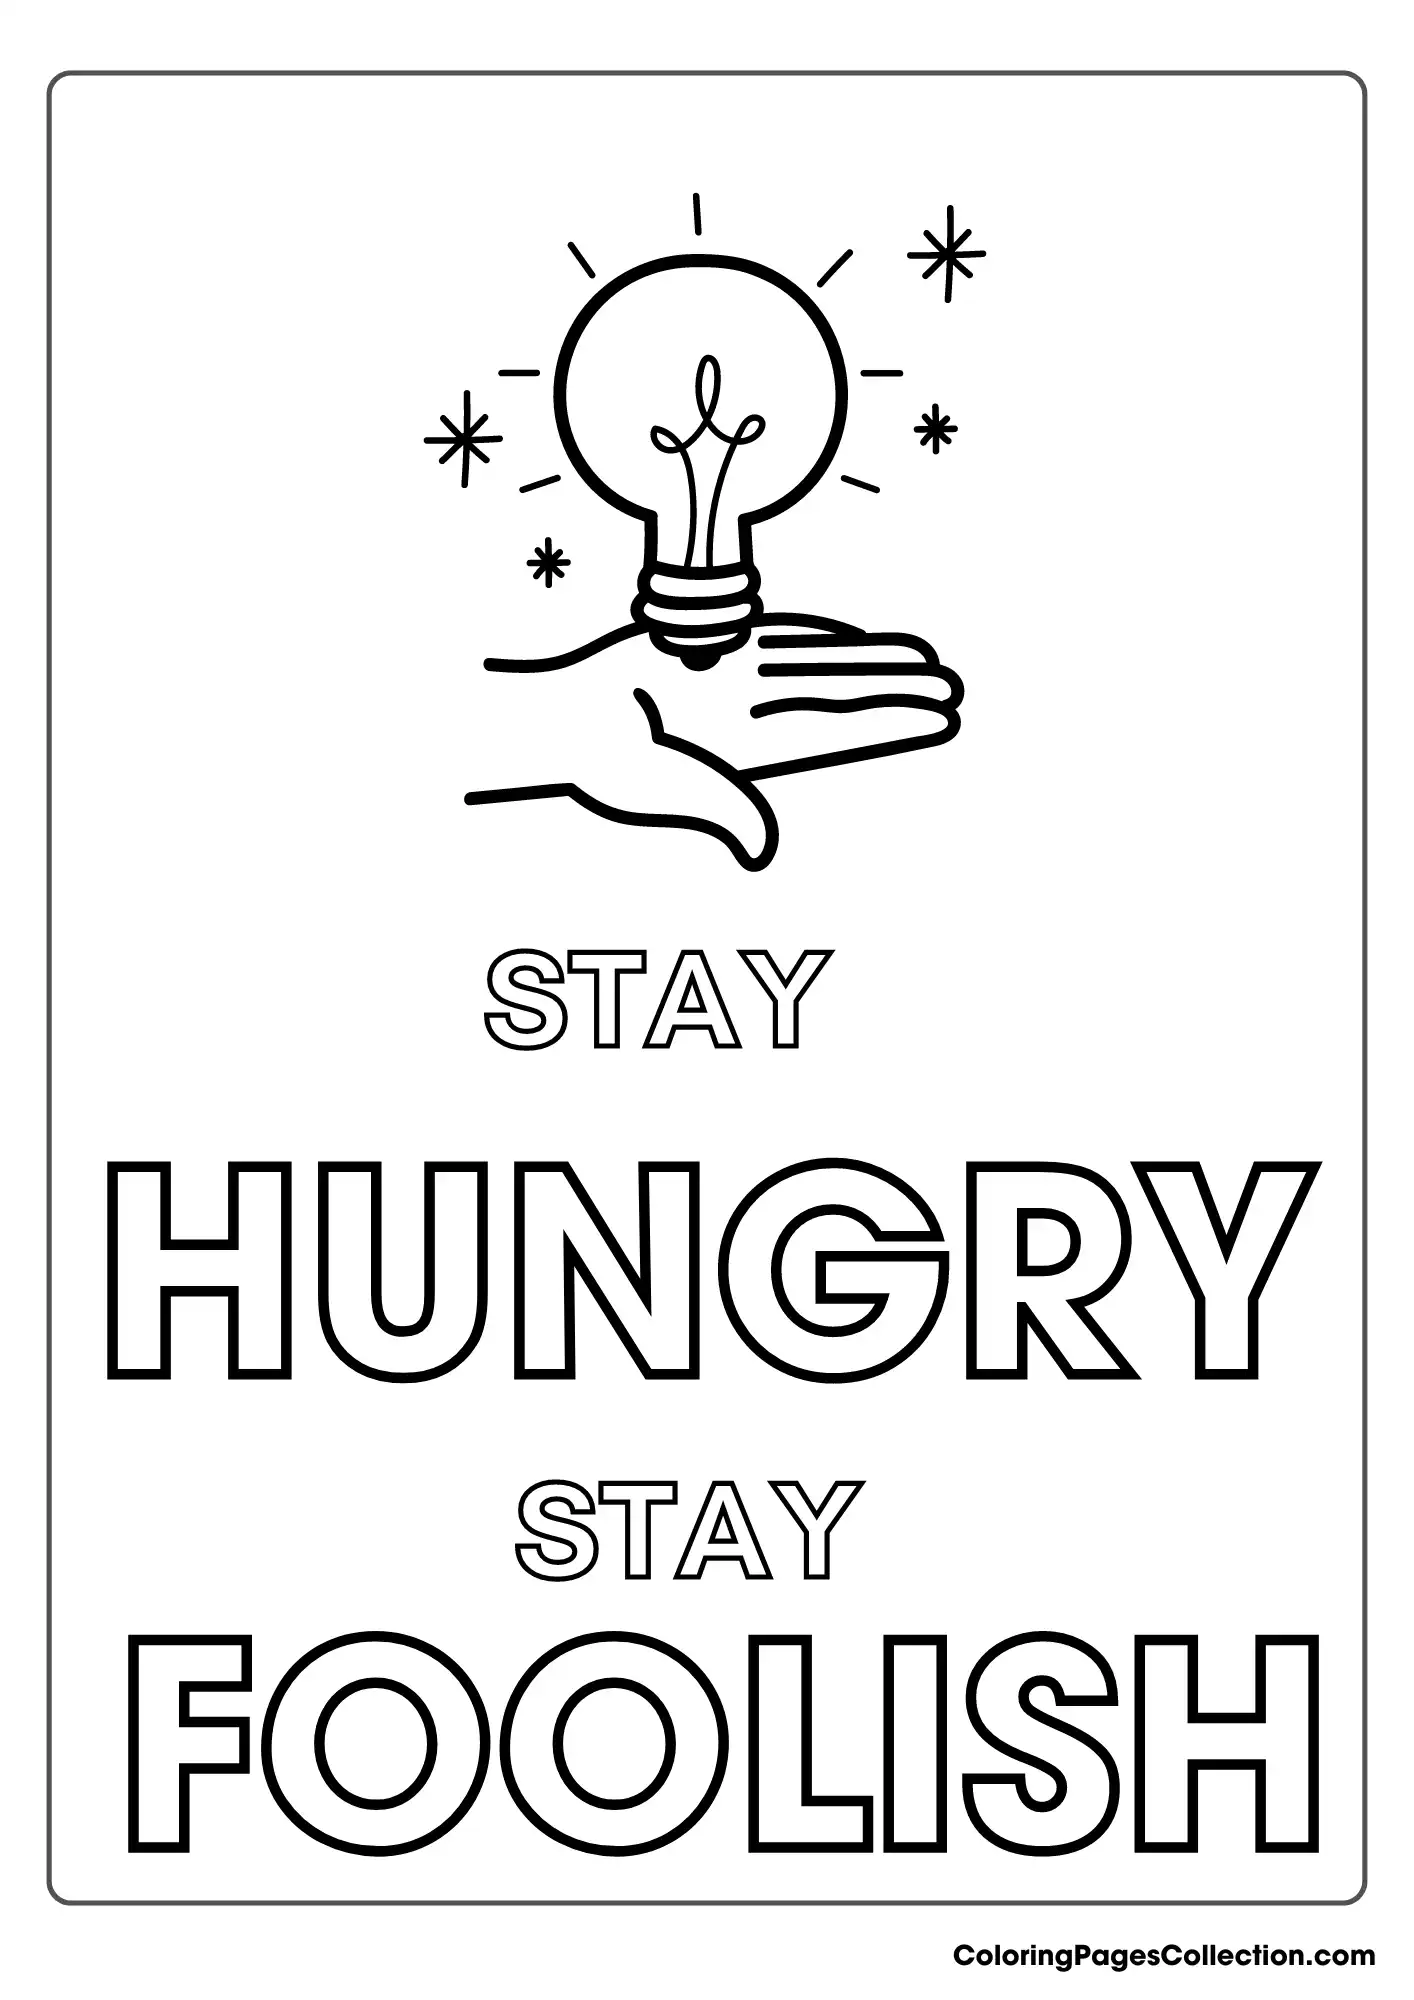 Coloring pages for teens, Stay Hungry Stay Foolish Coloring Page